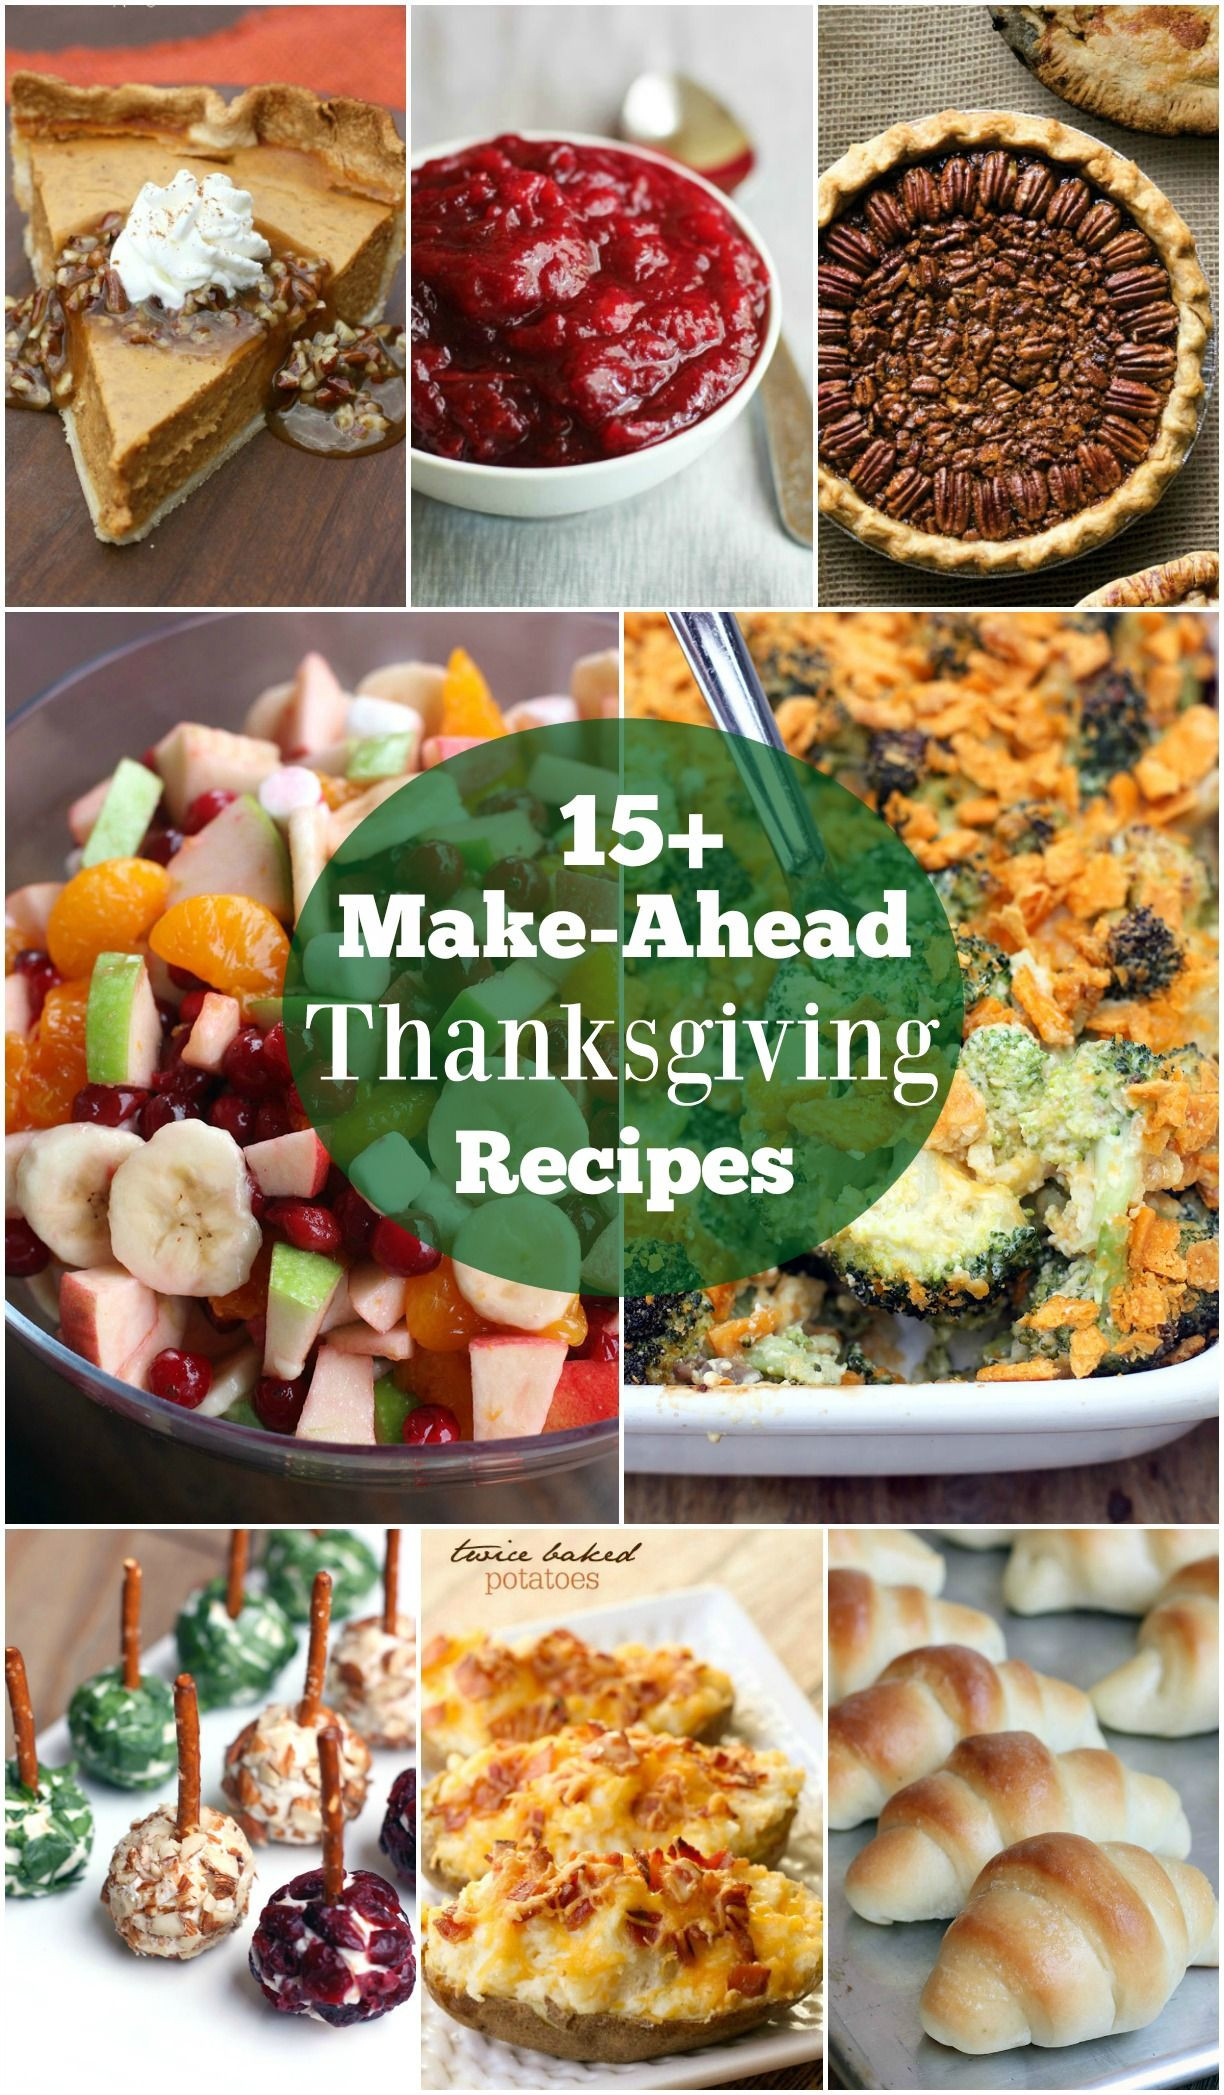 Easy Thanksgiving Side Dishes Make Ahead
 A round up of FAMILY FAVORITE easy make ahead Thanksgiving